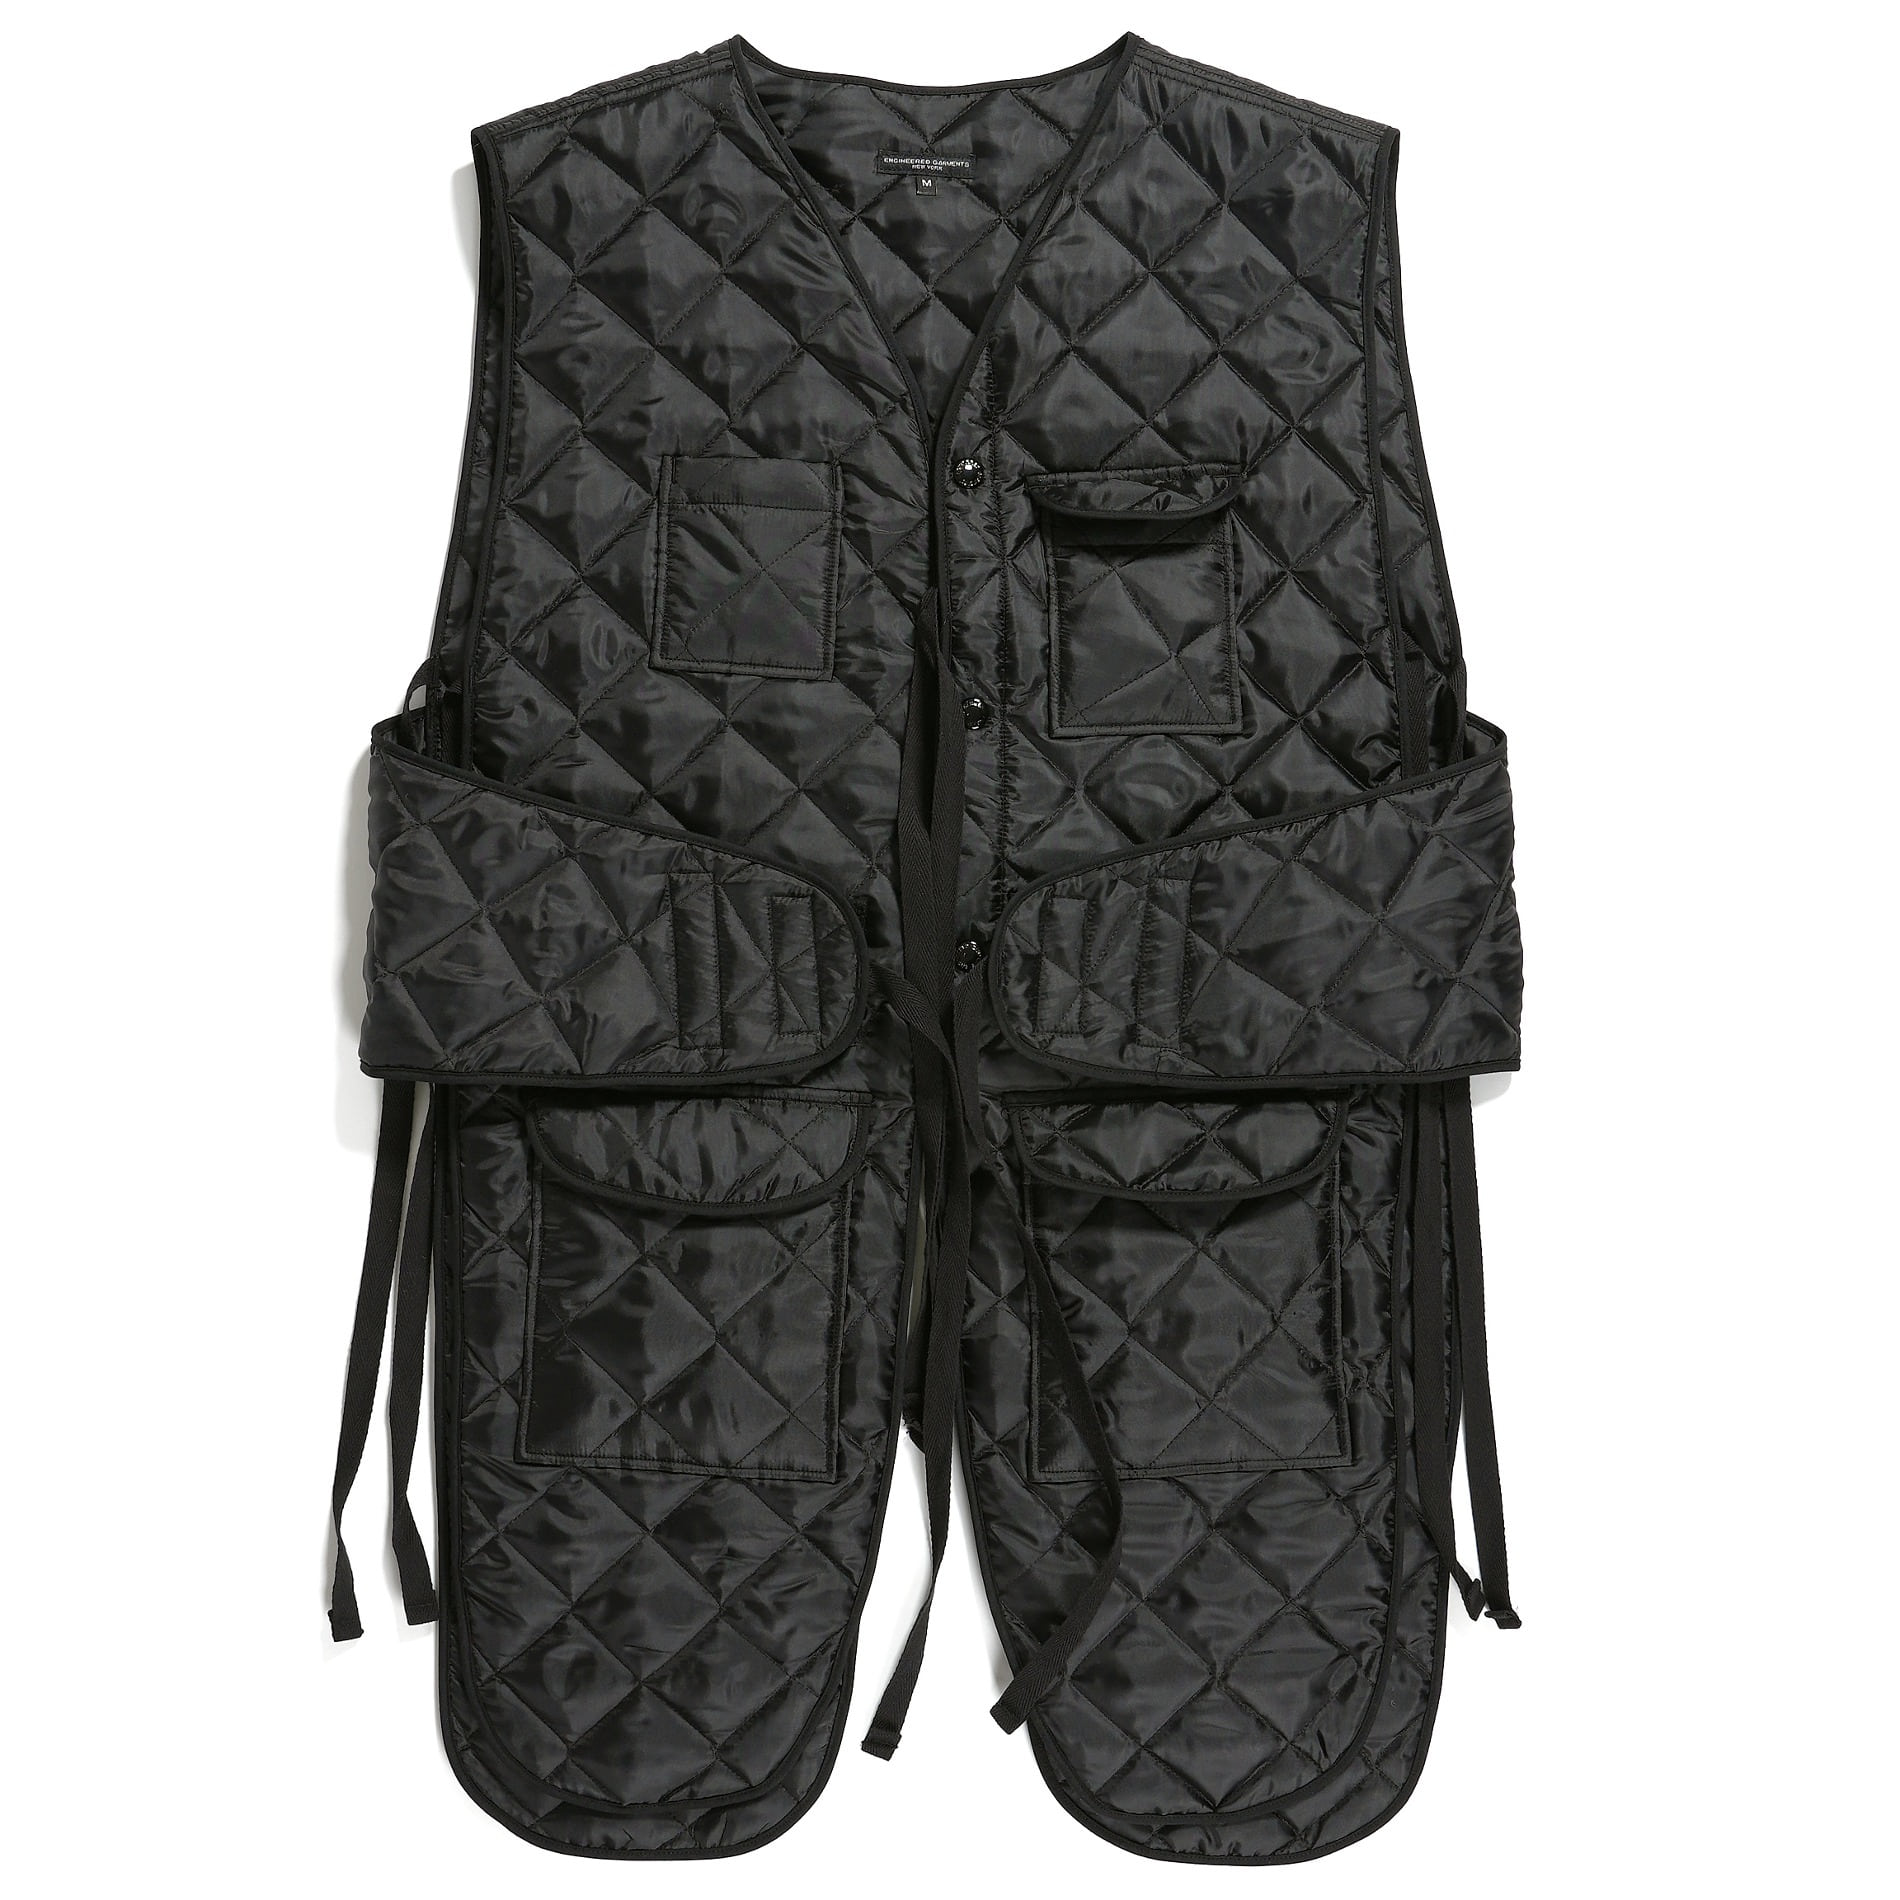 AW23 ENGINEERED GARMENTS LINER VEST BLACK DIAMOND QUILTED POLYESTER